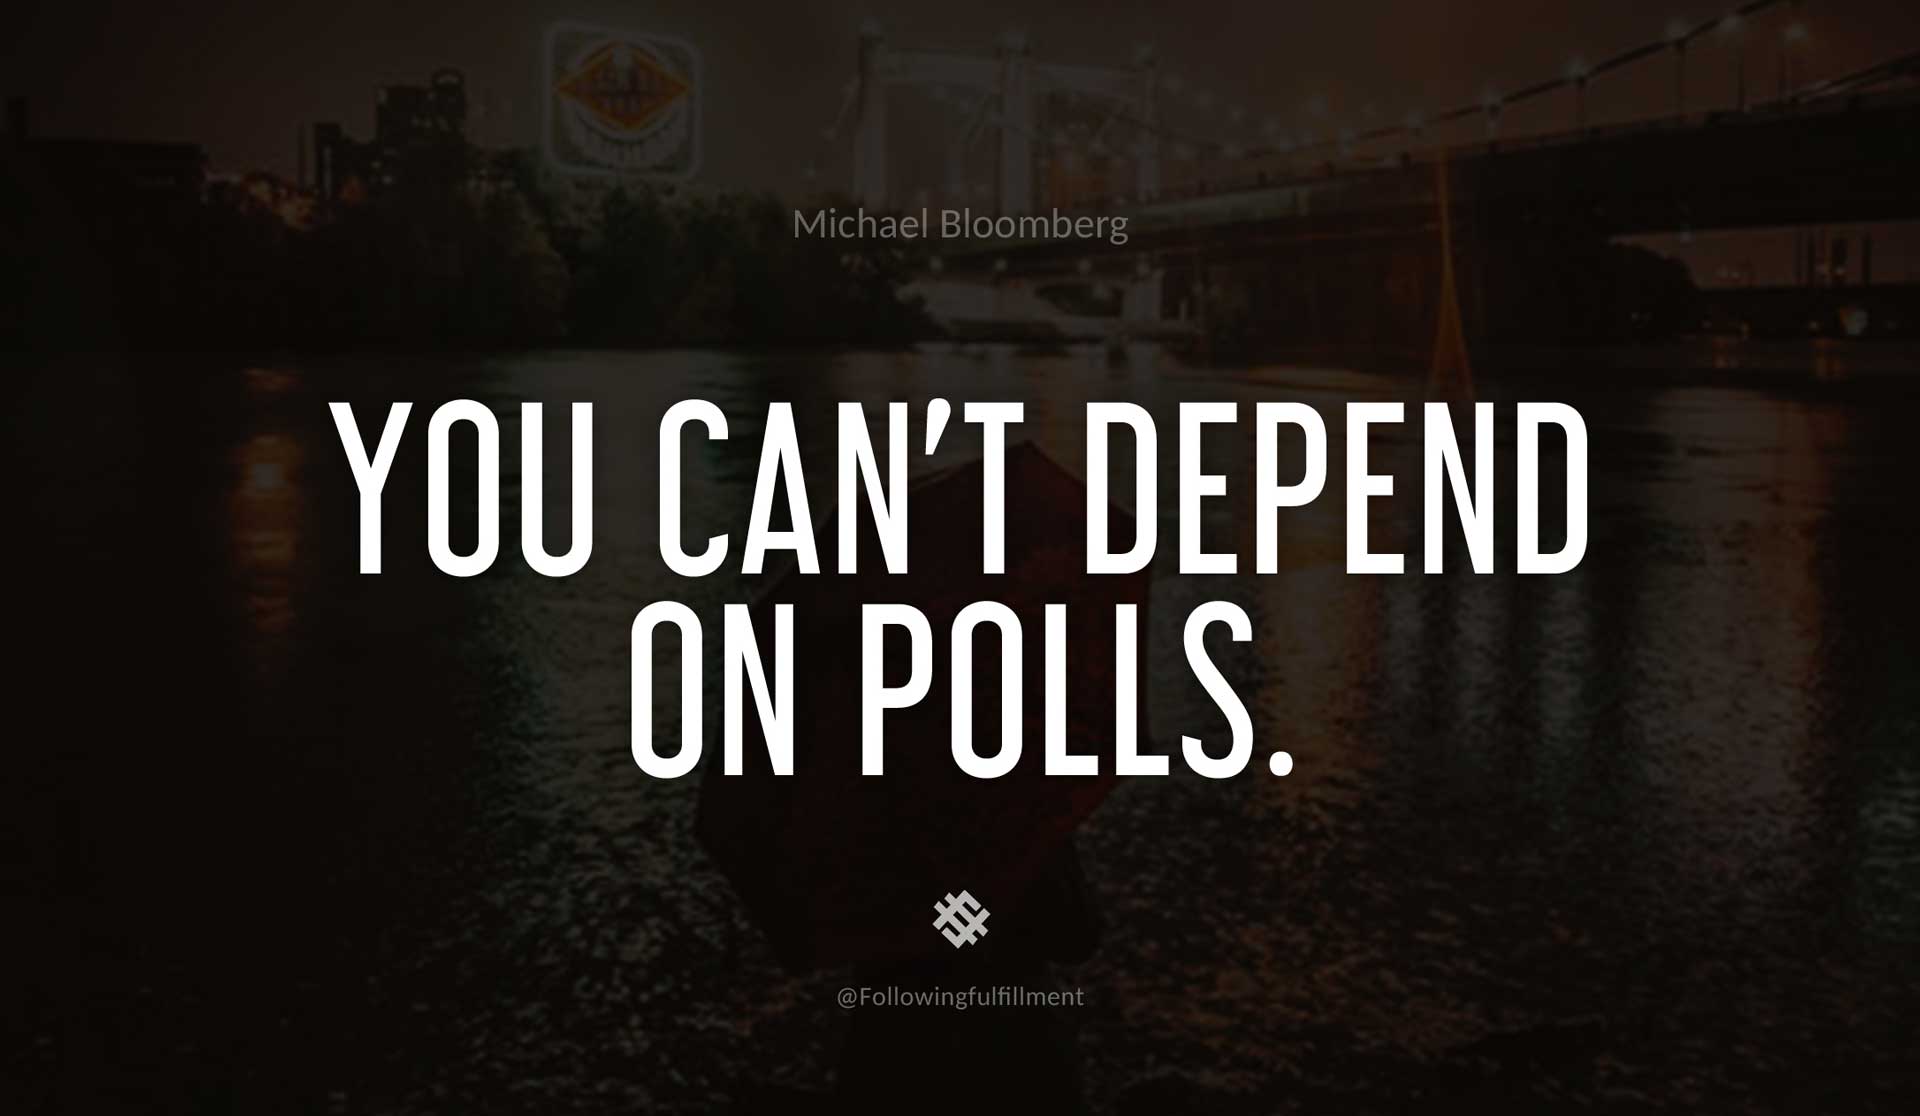 You-can't-depend-on-polls.-MICHAEL-BLOOMBERG-Quote.jpg